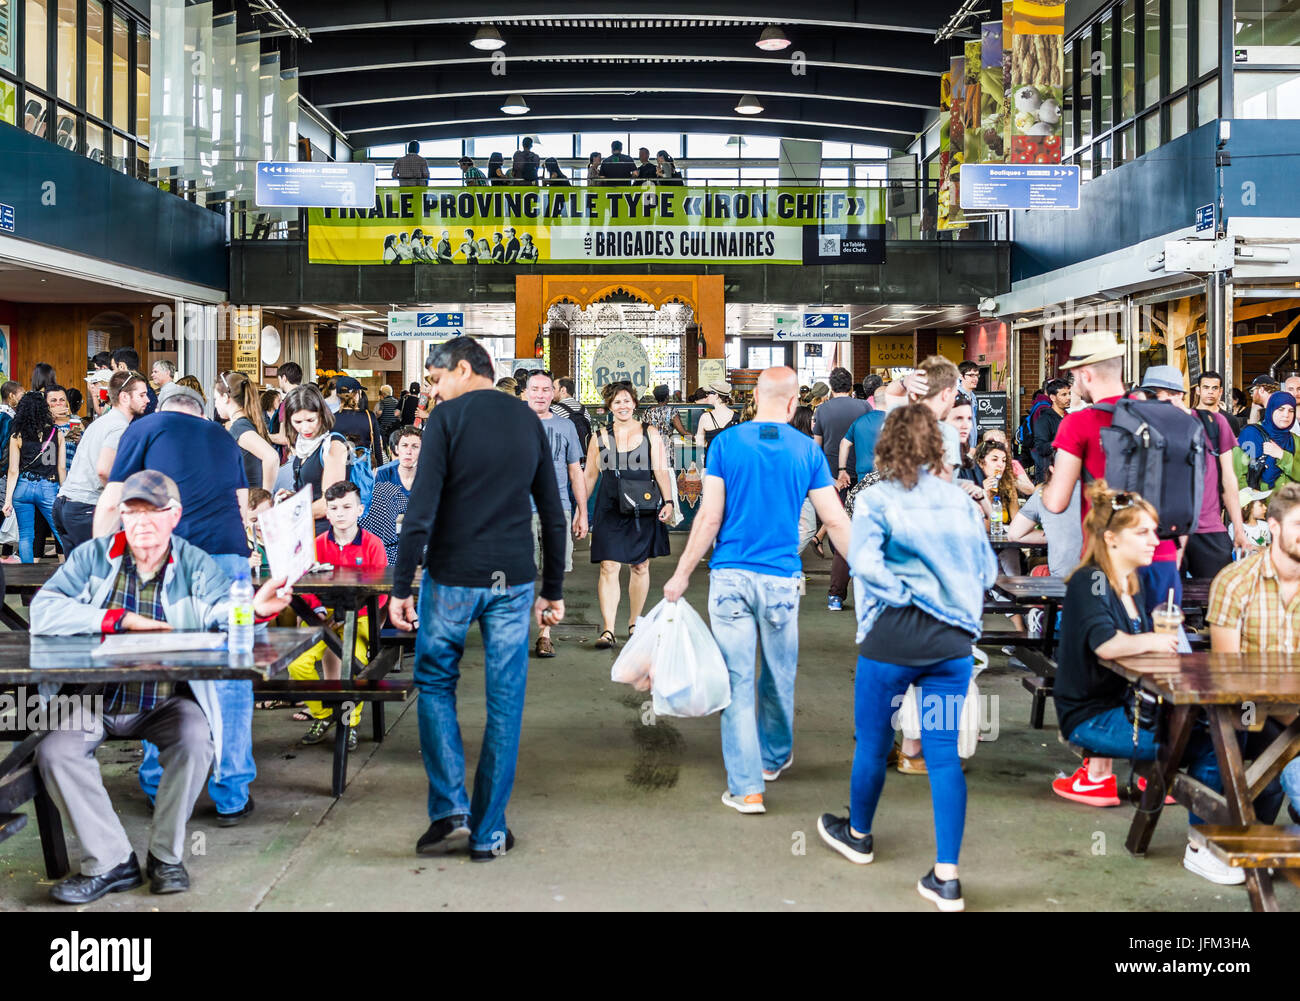 Montreal, Canada - May 28, 2017: Jean Talon market sign and entrance with people inside building eating sitting on tables in city in Quebec region Stock Photo